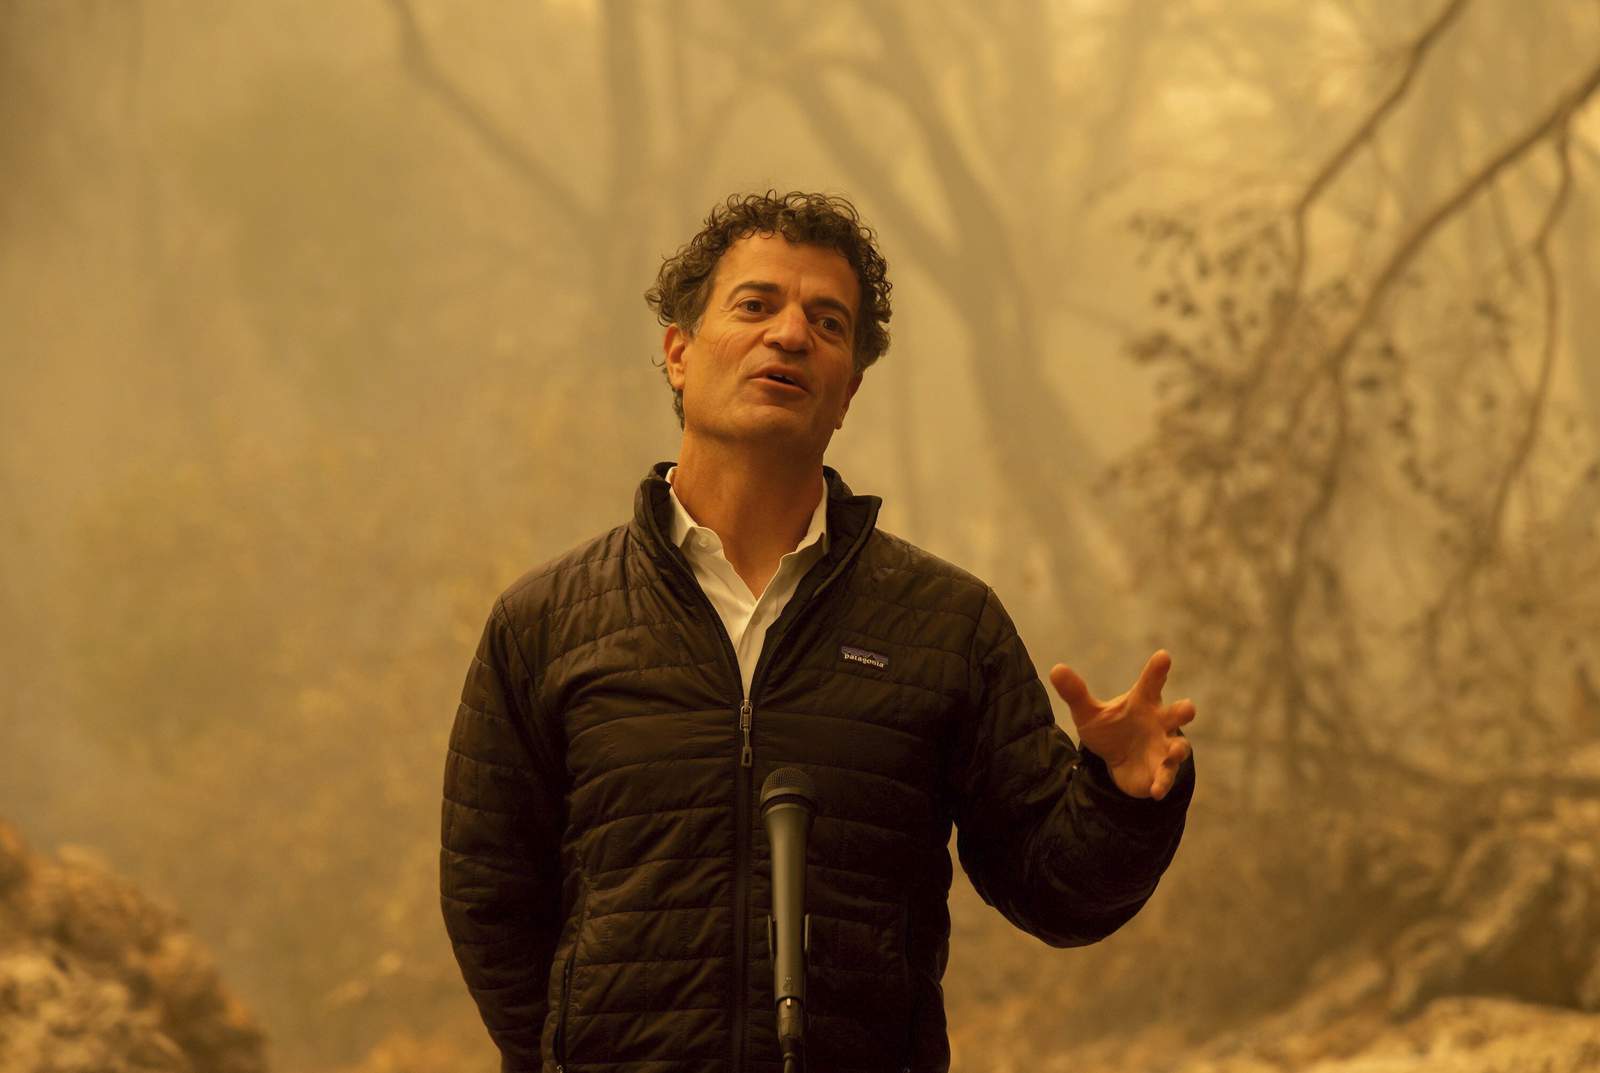 Amid ashes, California governor fires away on climate change